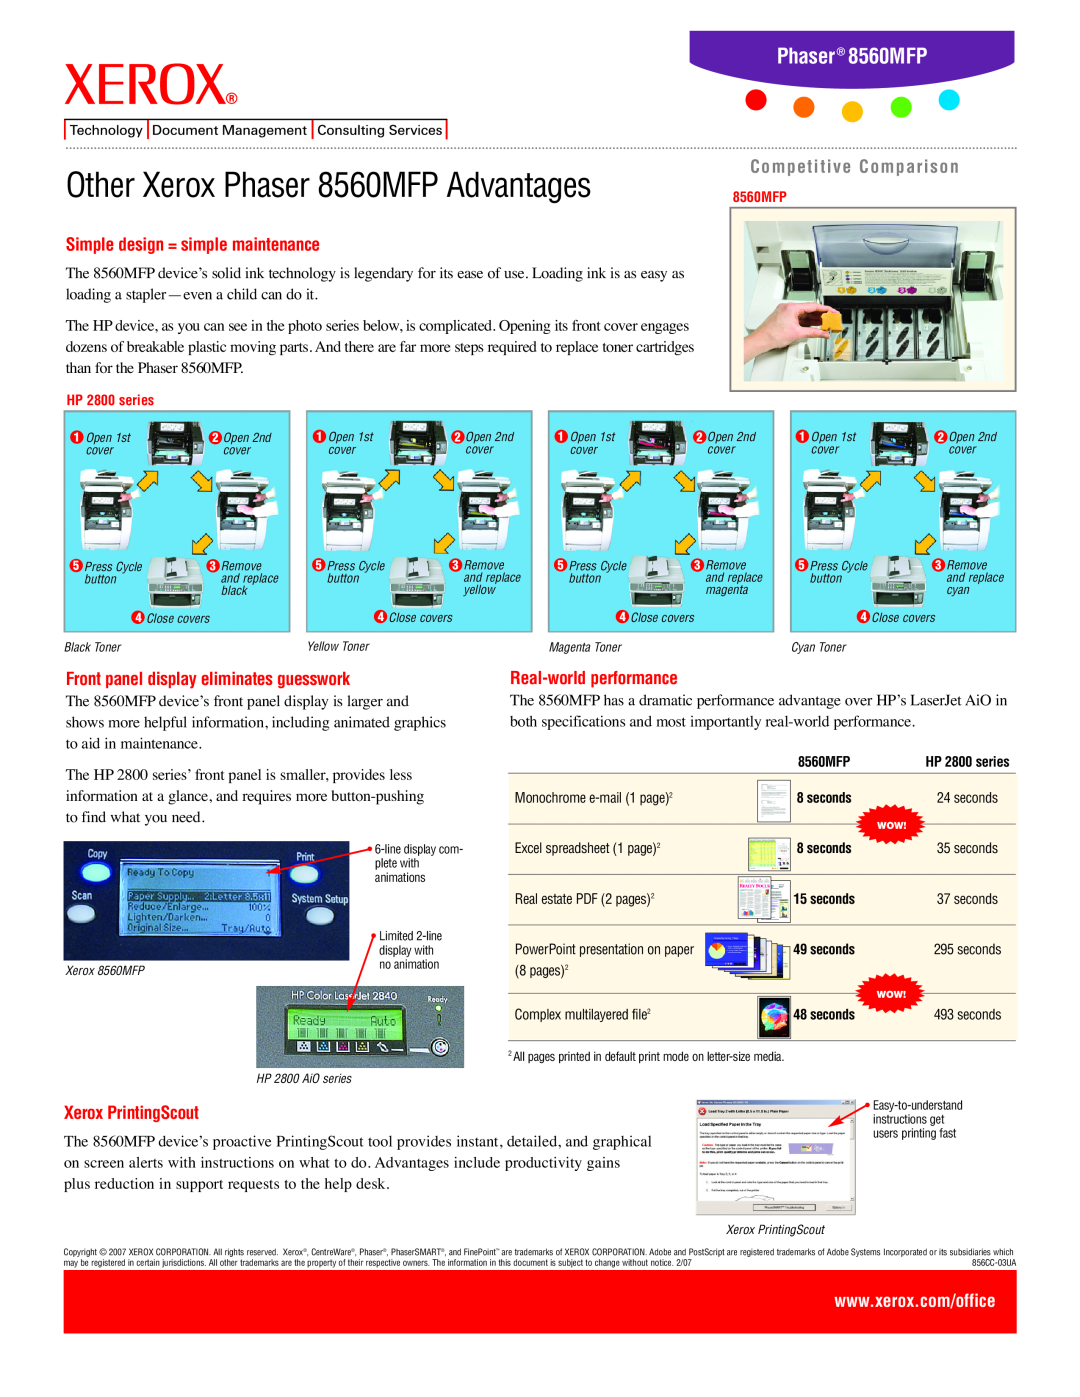 Xerox 8560MFP, 2820 Simple design = simple maintenance, Front panel display eliminates guesswork, Real-worldperformance 